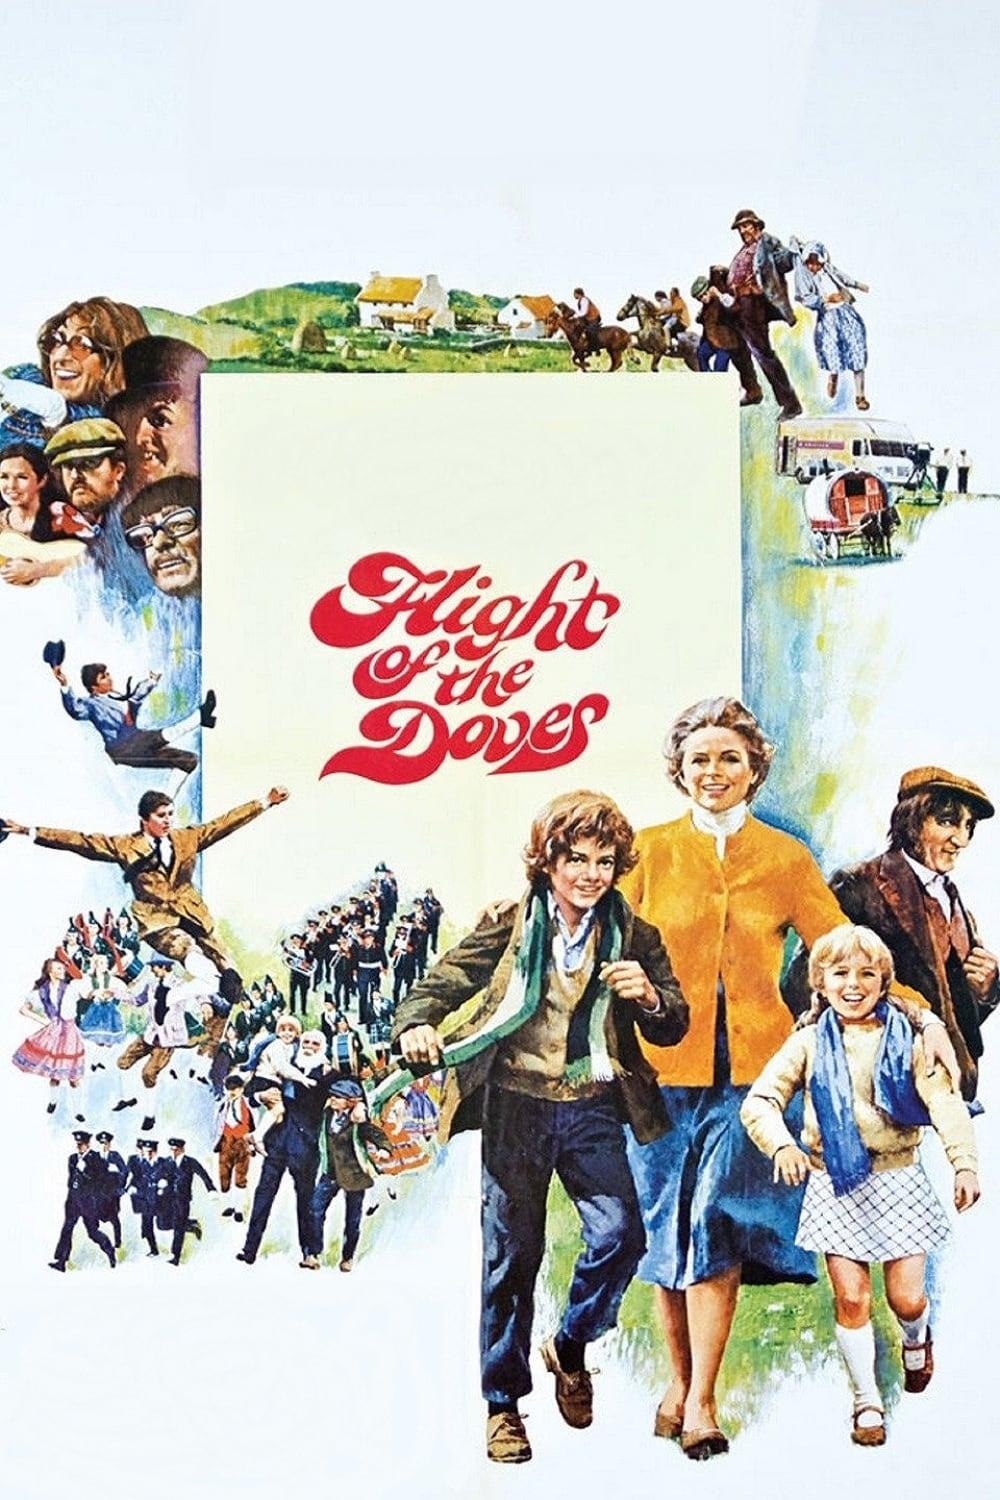 Flight of the Doves poster